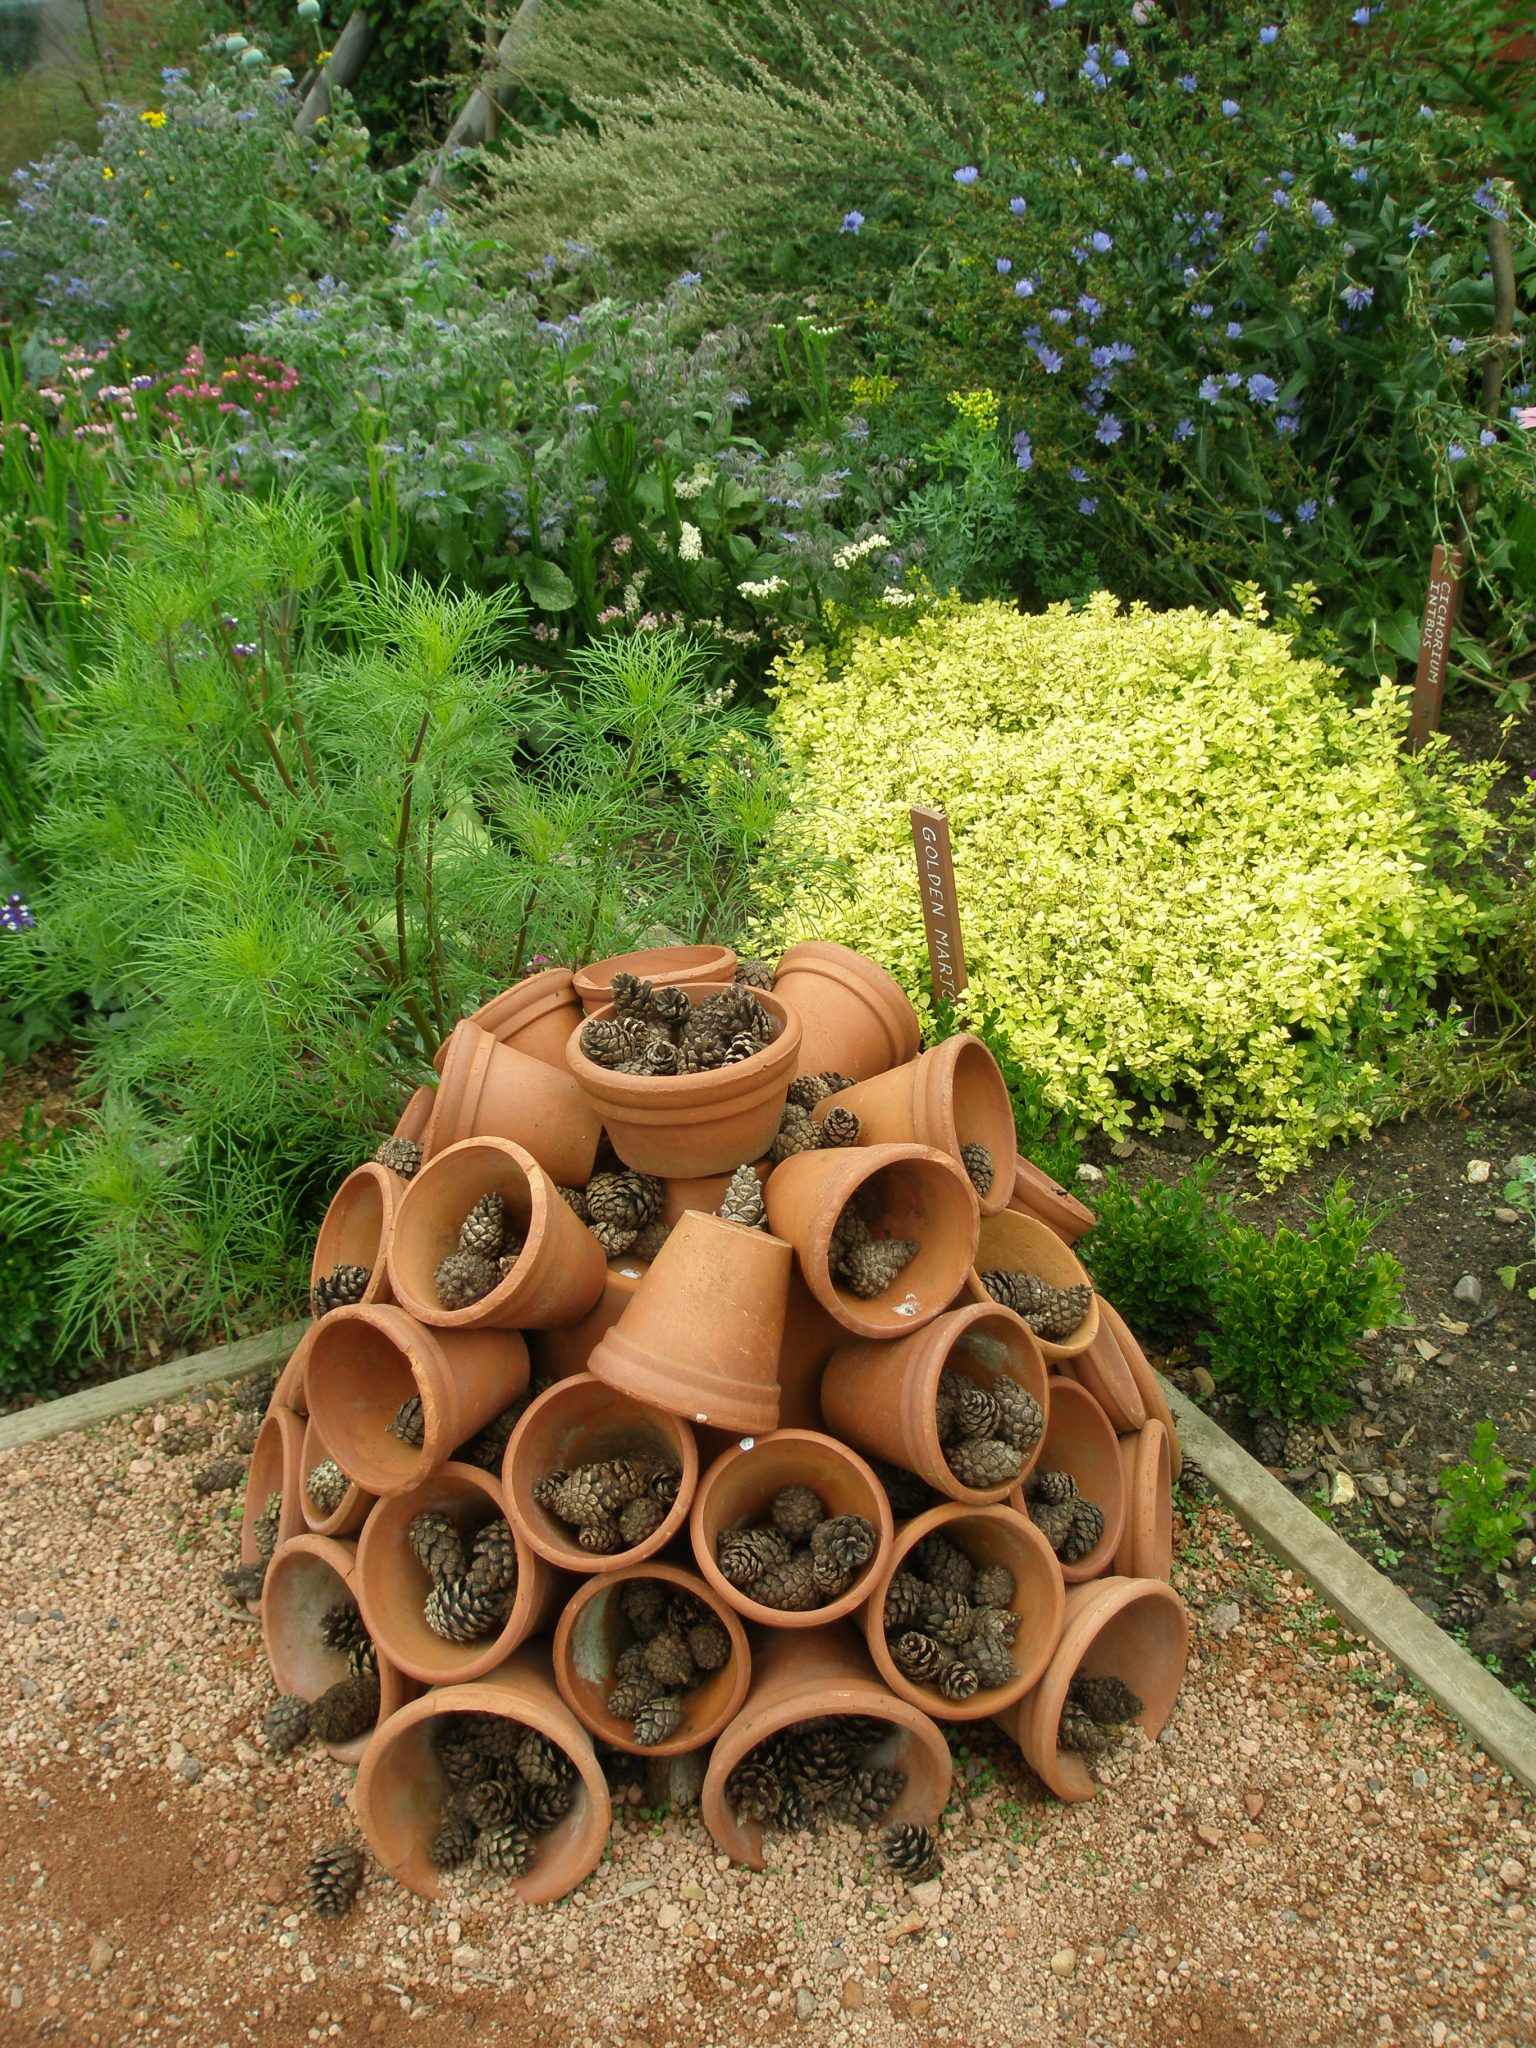 A very simple Insect Hotel, in the Veggie Garden of Packwood House, in Warkwickshire, England